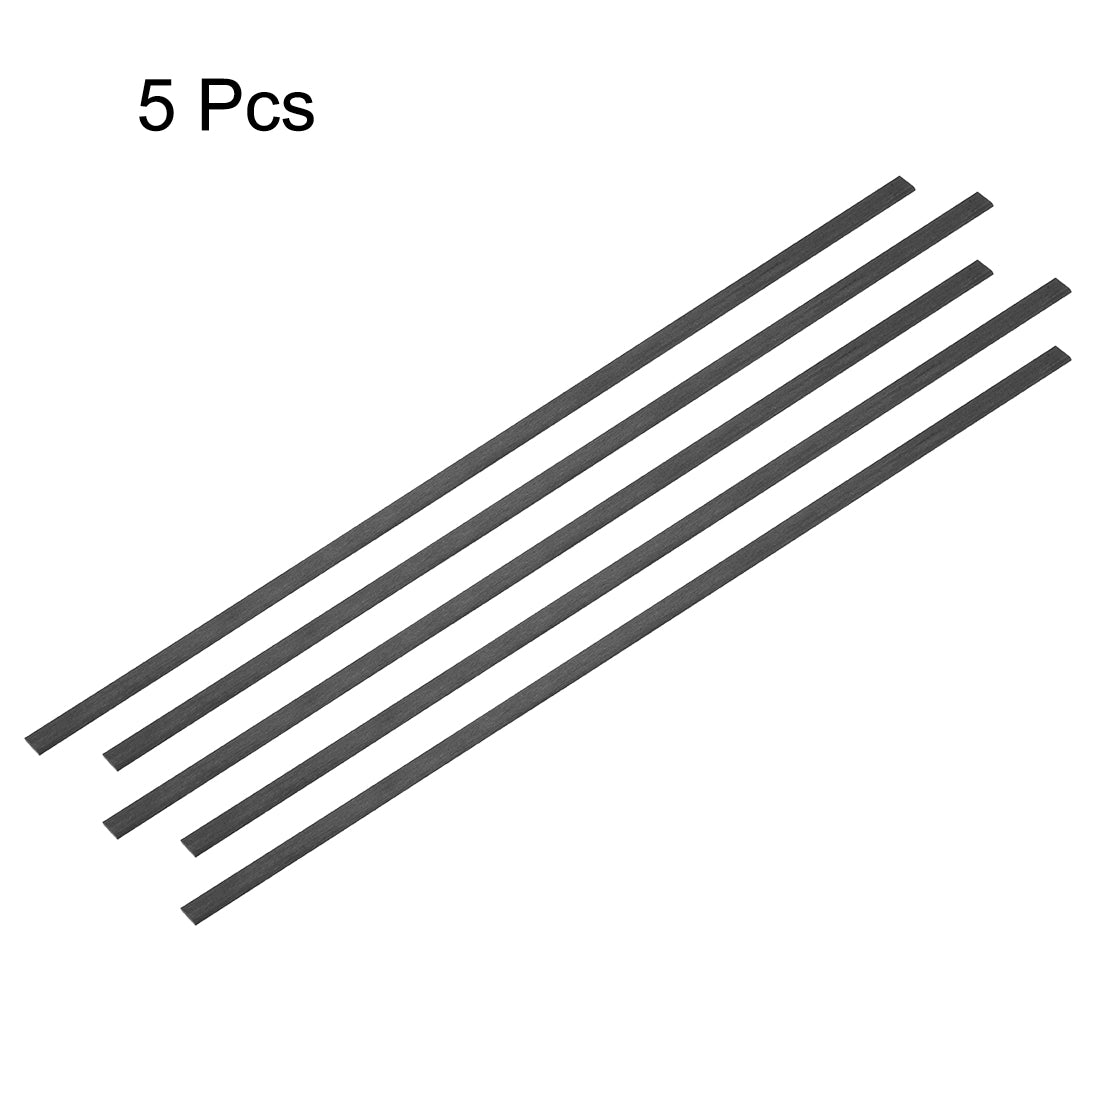 uxcell Uxcell Carbon Fiber Strip Bars 1x5mm 200mm Length Pultruded Carbon Fiber Strips for Kites, RC Airplane 5 Pcs